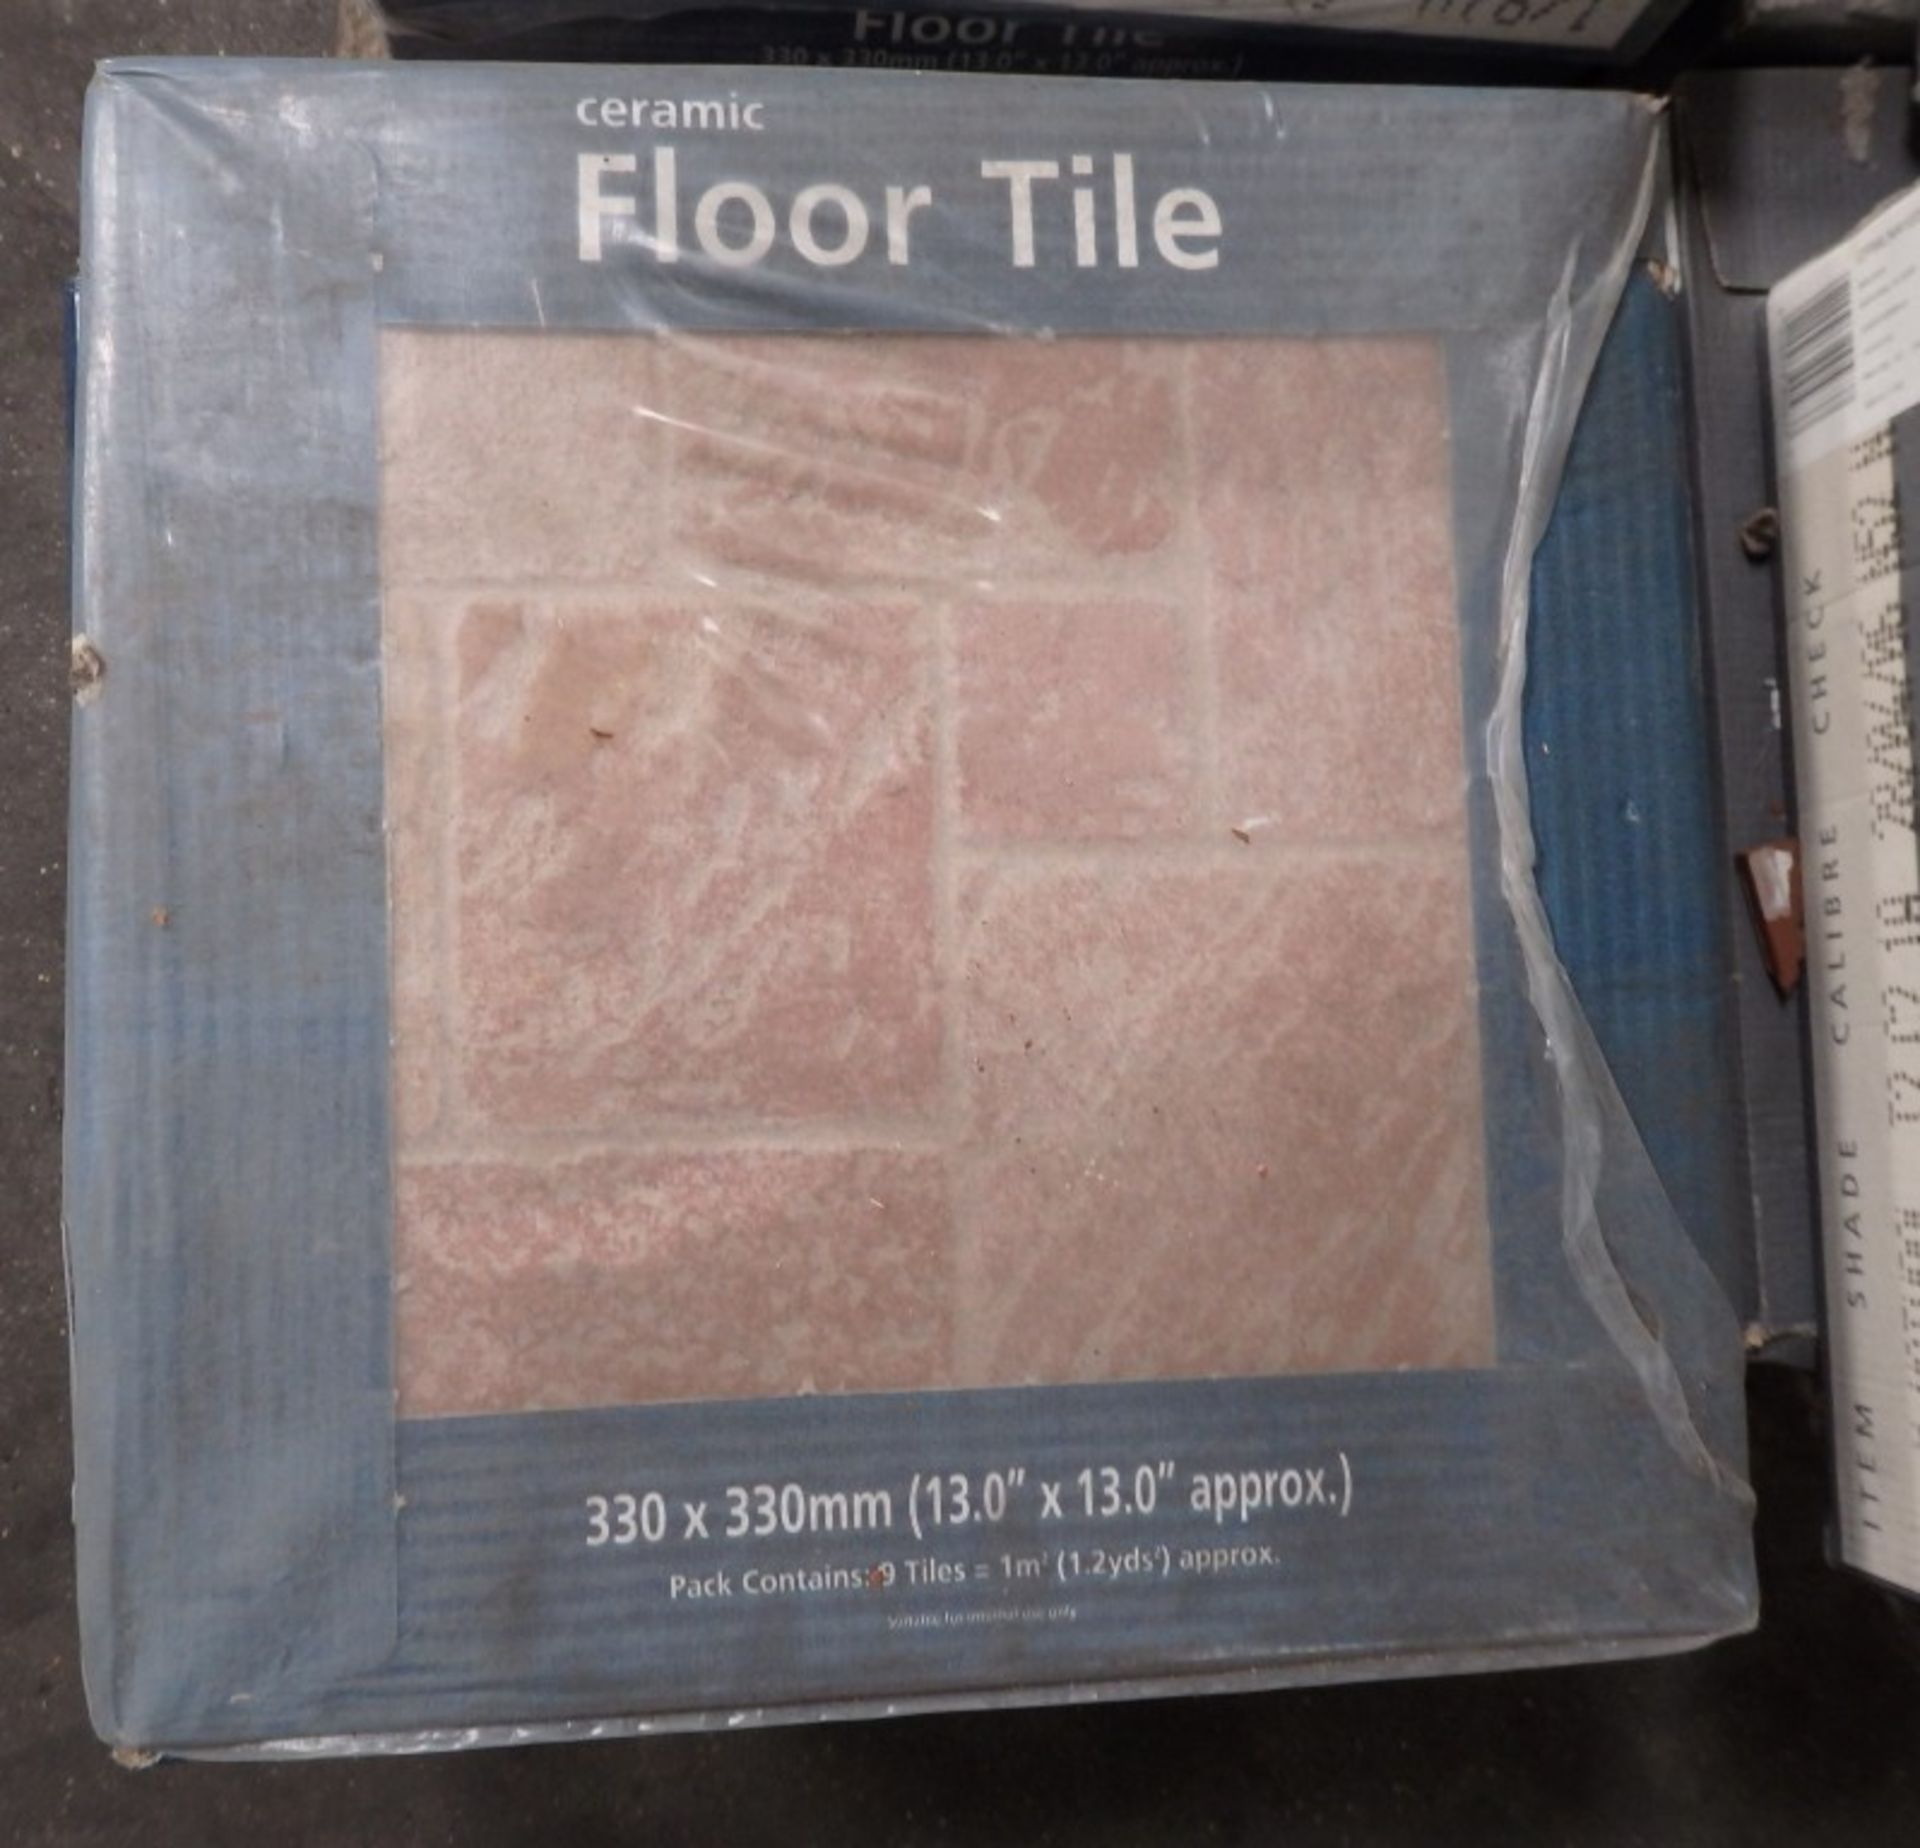 Approx 35 Boxes of Ceramic Floor Tiles - 330x330mm Floor Tiles - Each Pack Contains 9 Tiles - Ref